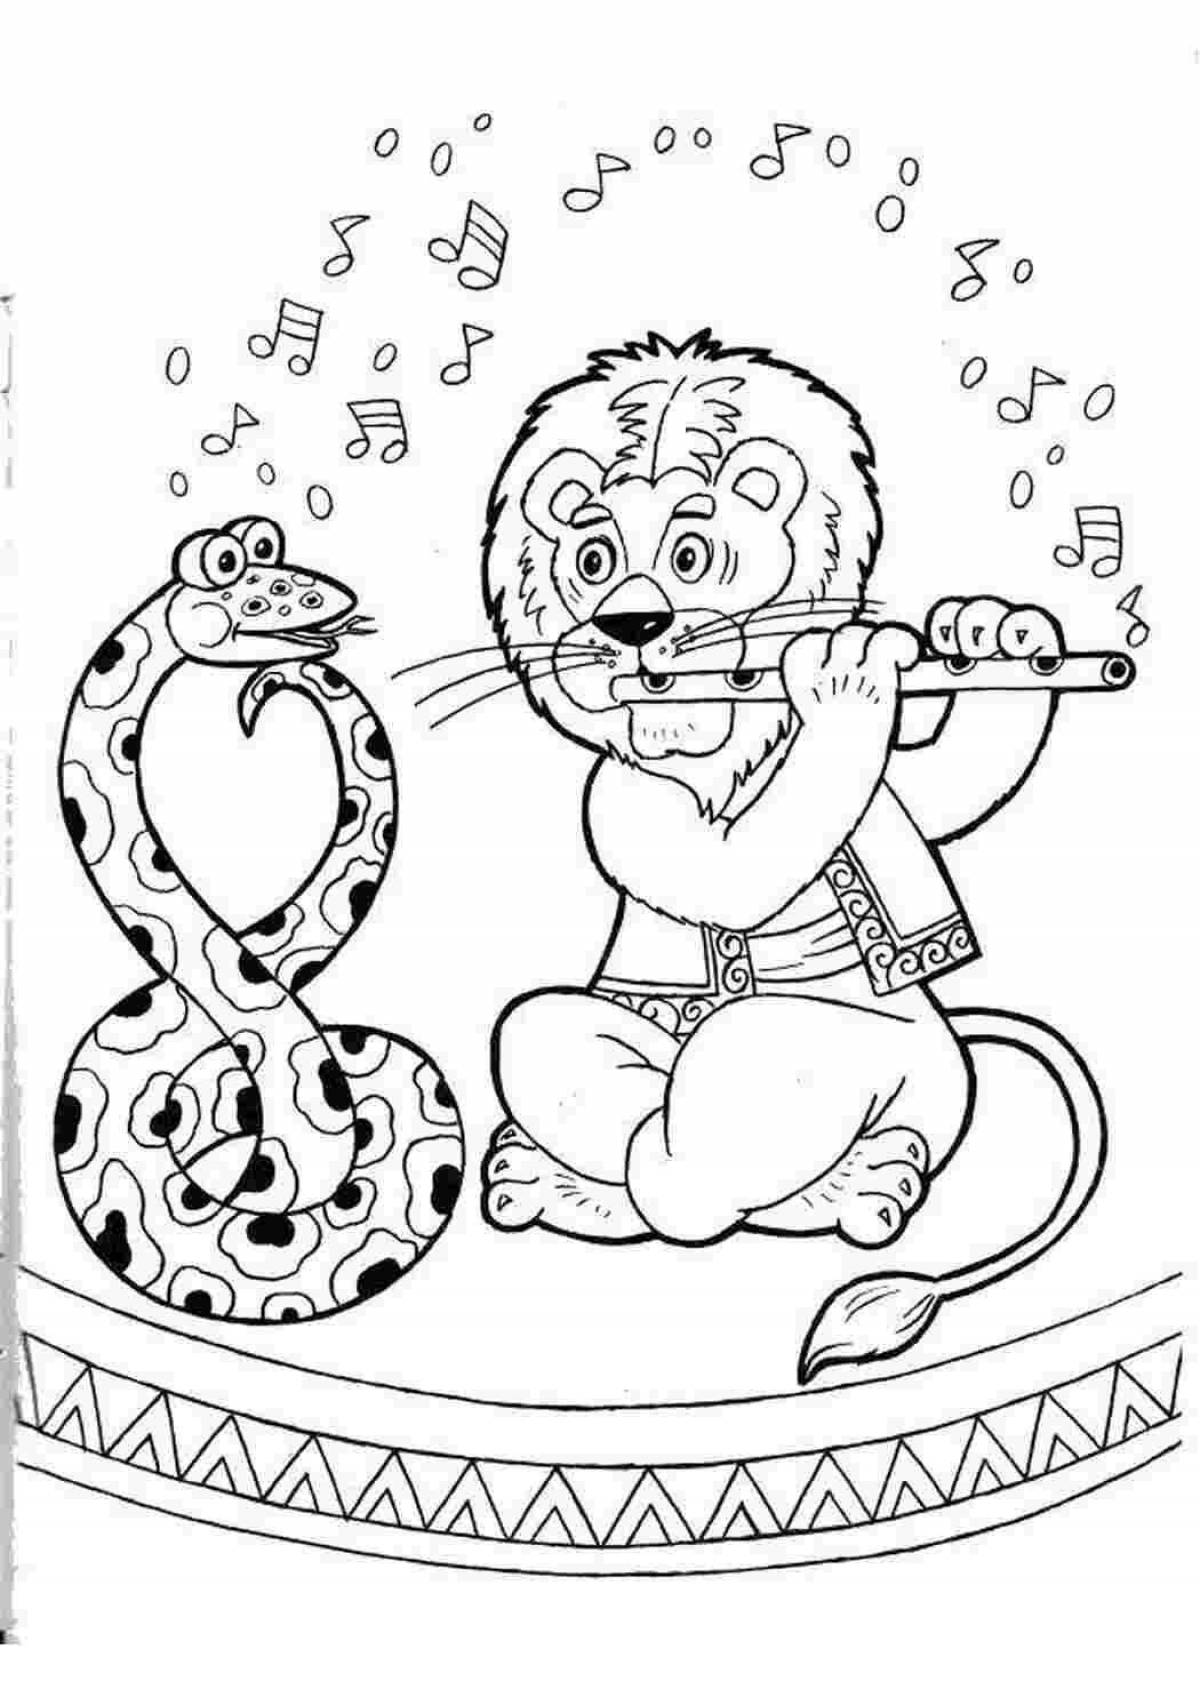 Outstanding circus coloring book for 4-5 year olds